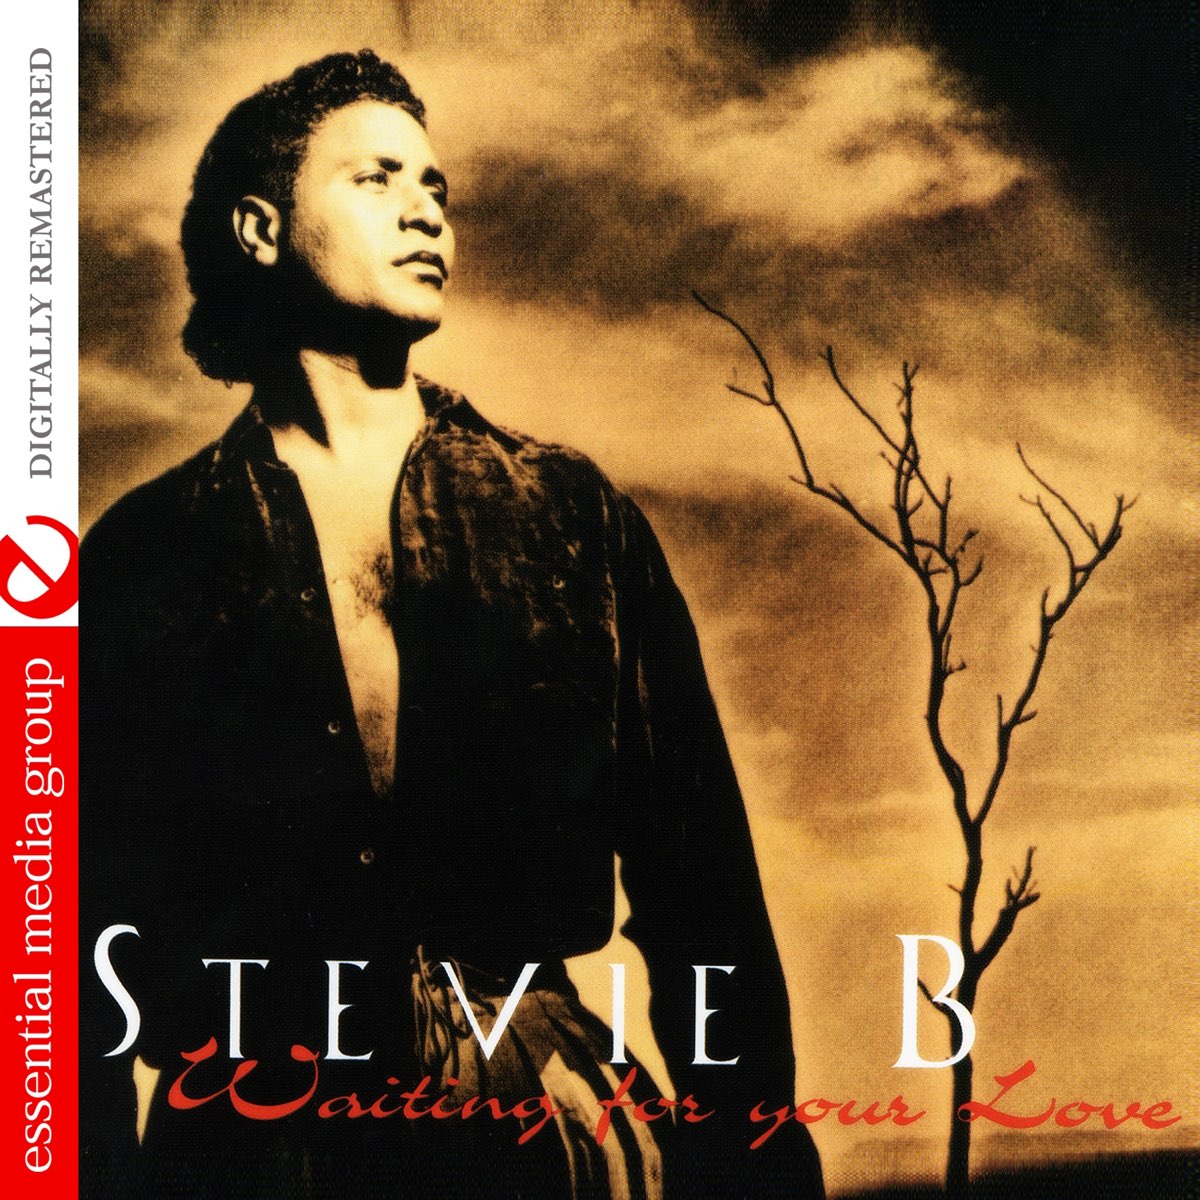 stevie b waiting for your love torrent